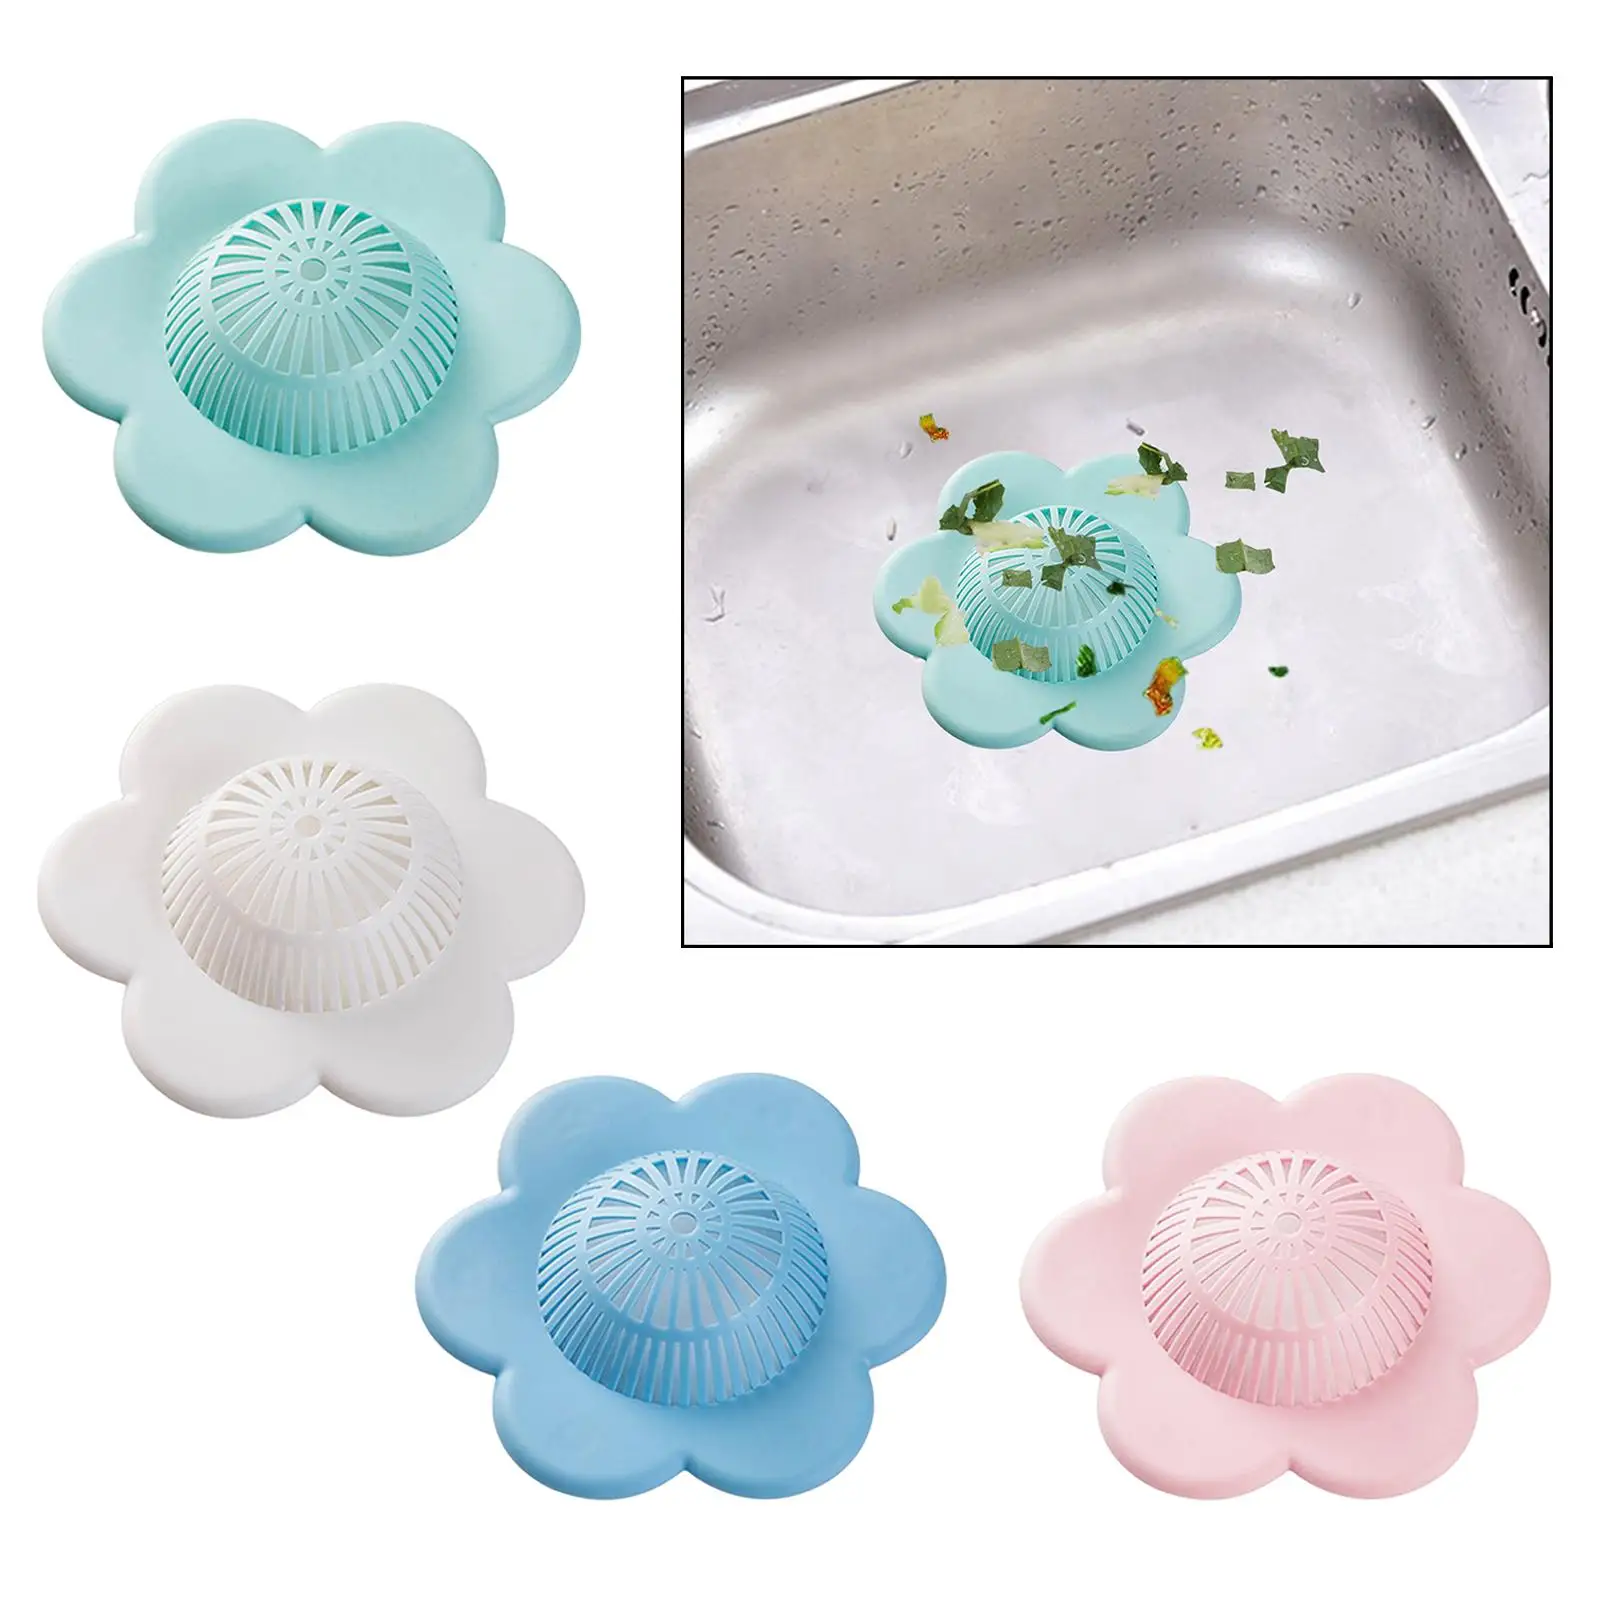 Effective hair catchers Sink Strainer with Suction Cup Drainage Shower Drain Protectors Shower Drain Covers for Bathtub Bathroom